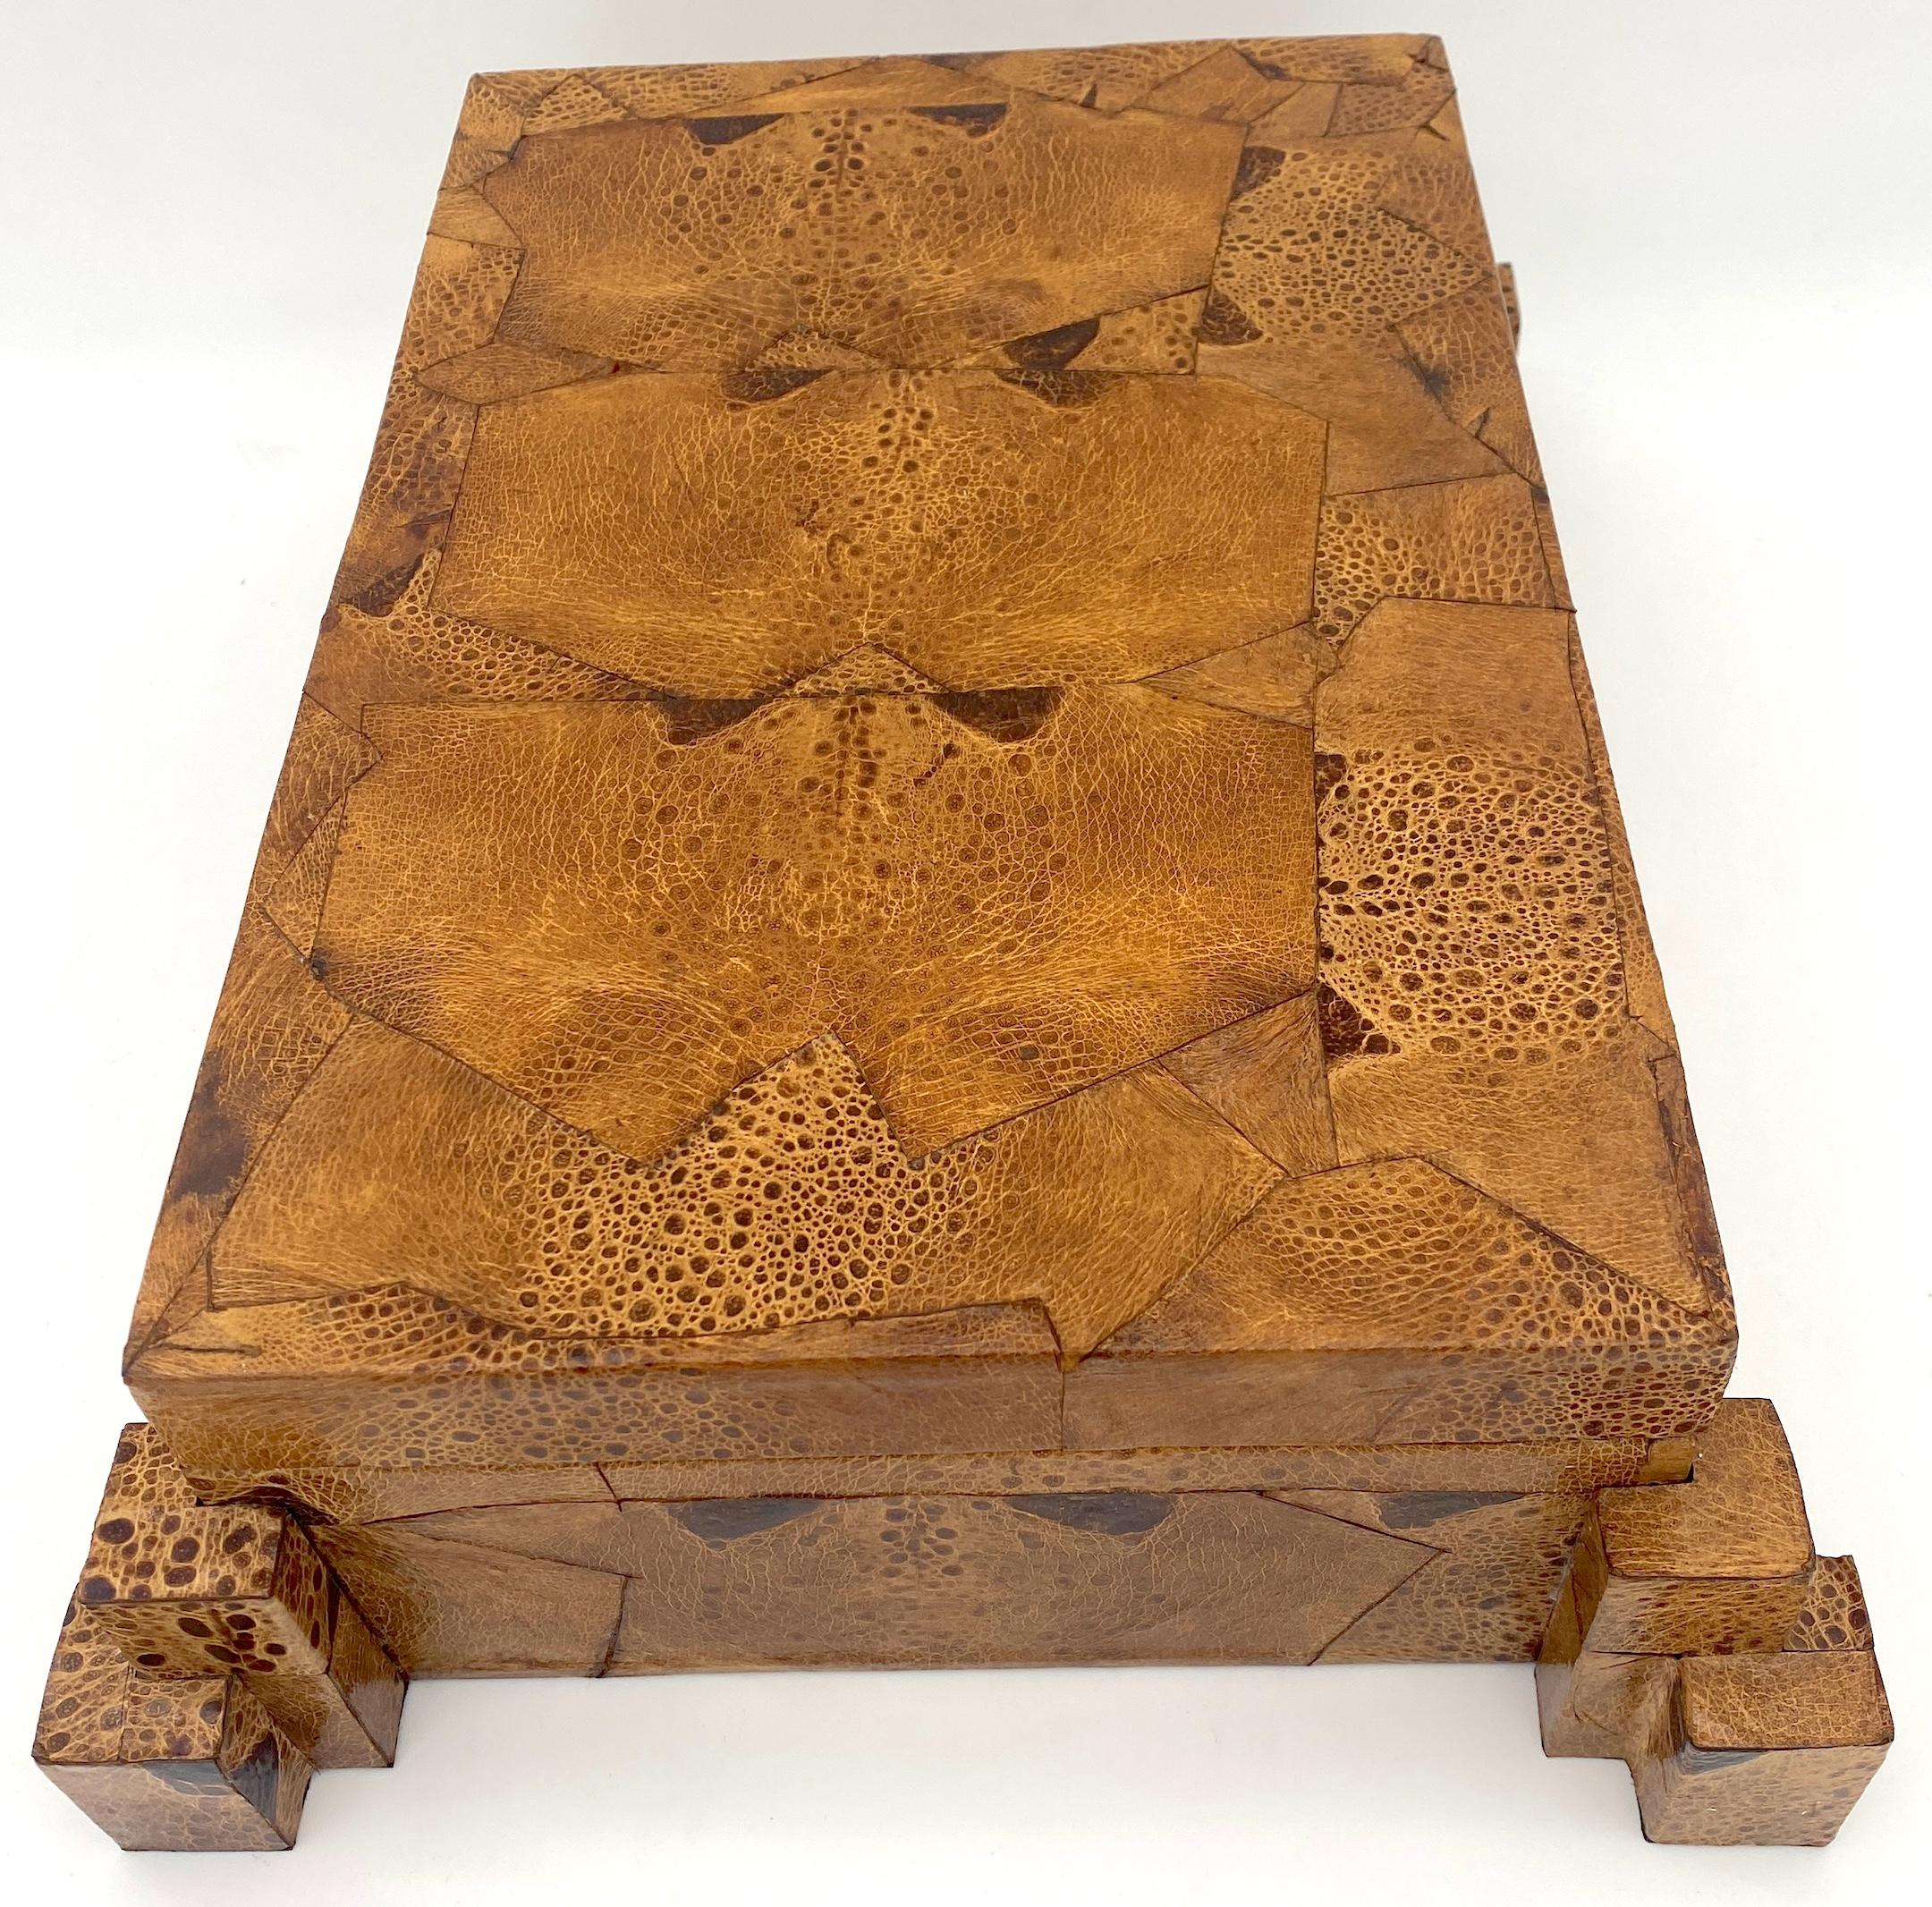 Exotic 1970s Frog Skin-Leather Asymmetrical Table Box, Style of Karl Springer  For Sale 2